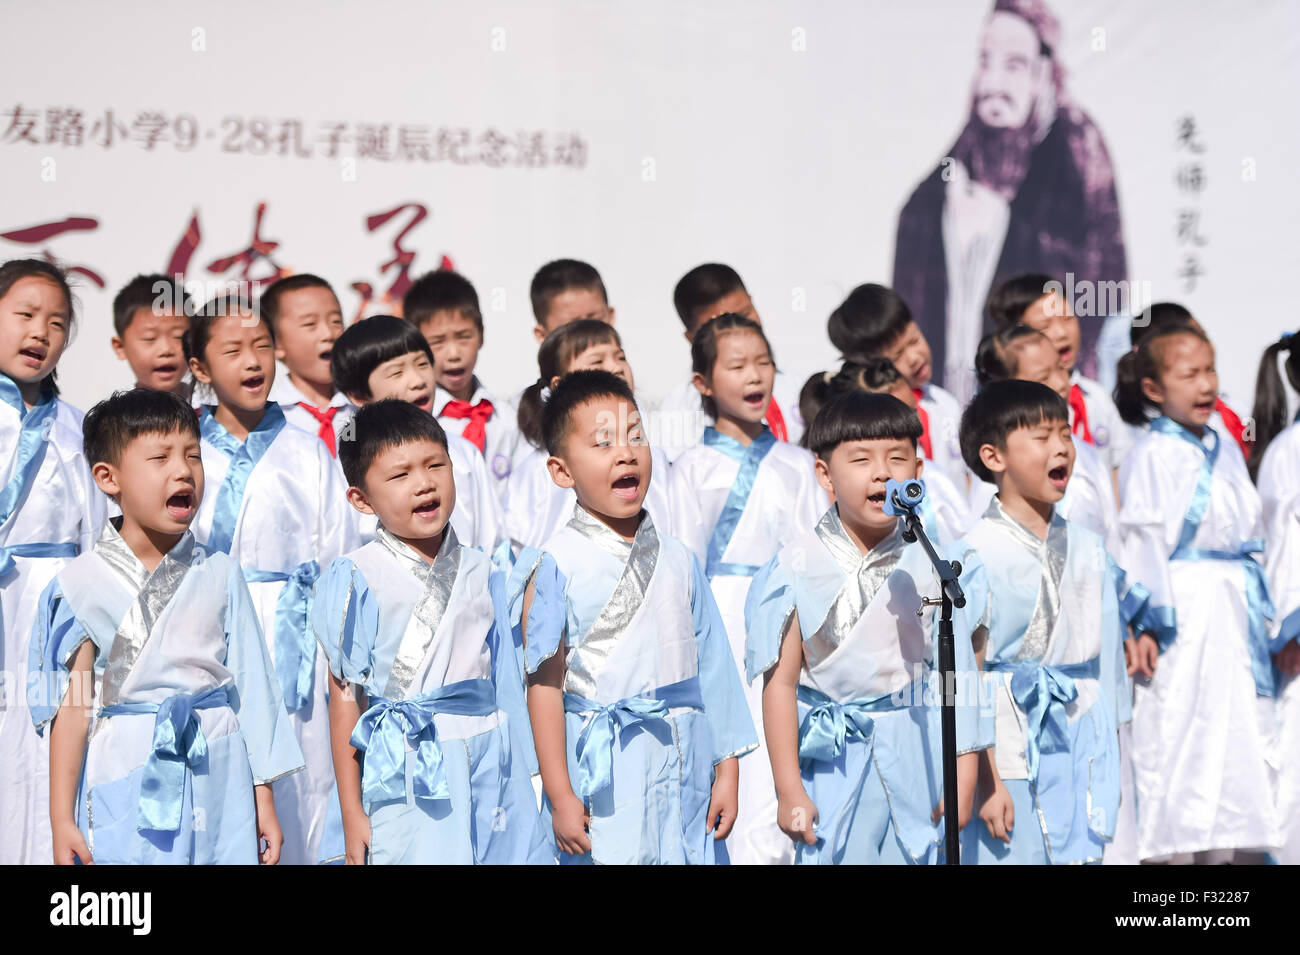 Hefei, China's Anhui province. 28th Sep, 2015. Students of Xiyoulu primary school wearing traditional costumes recite the Analects of Confucius during a ceremony to mark the Chinese philosopher Confucius' 2,566th birth anniversary in Hefei, capital of east China's Anhui province, Sept. 28, 2015. © Zhang Duan/Xinhua/Alamy Live News Stock Photo